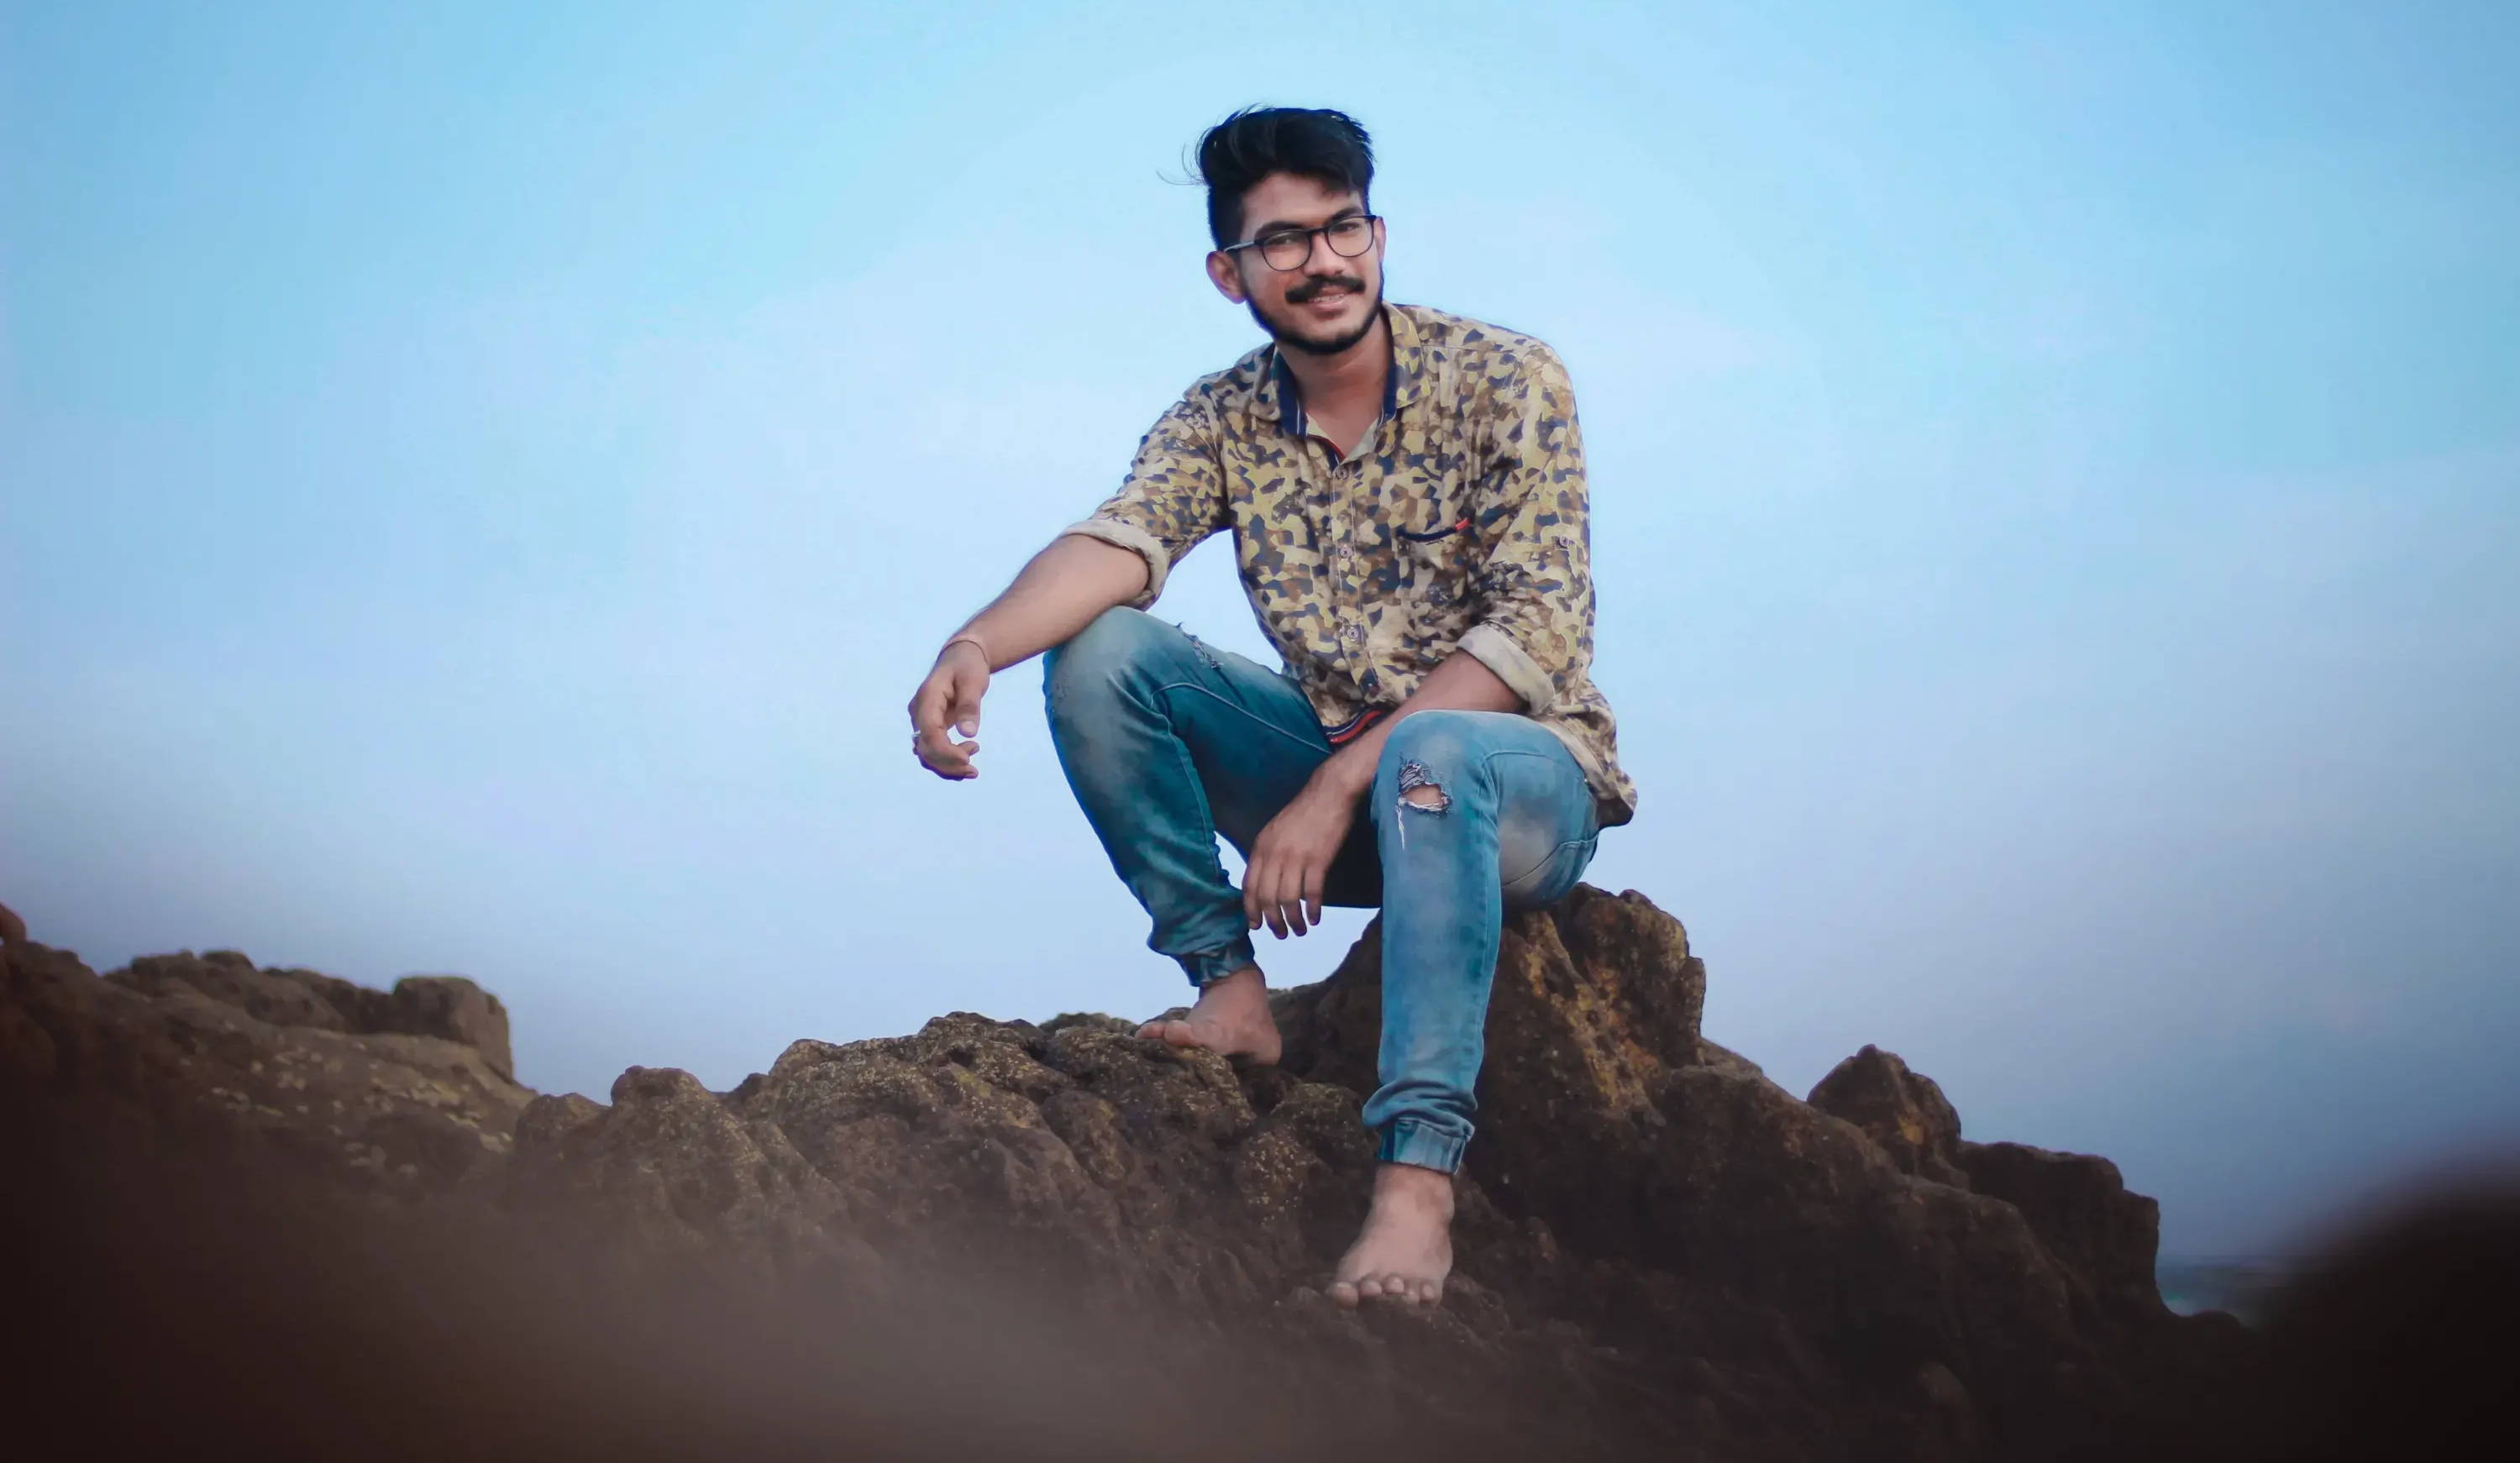 A man sits on a jagged rock in blue jeans and a button down shirt. Image by Vamsi Badireddi.